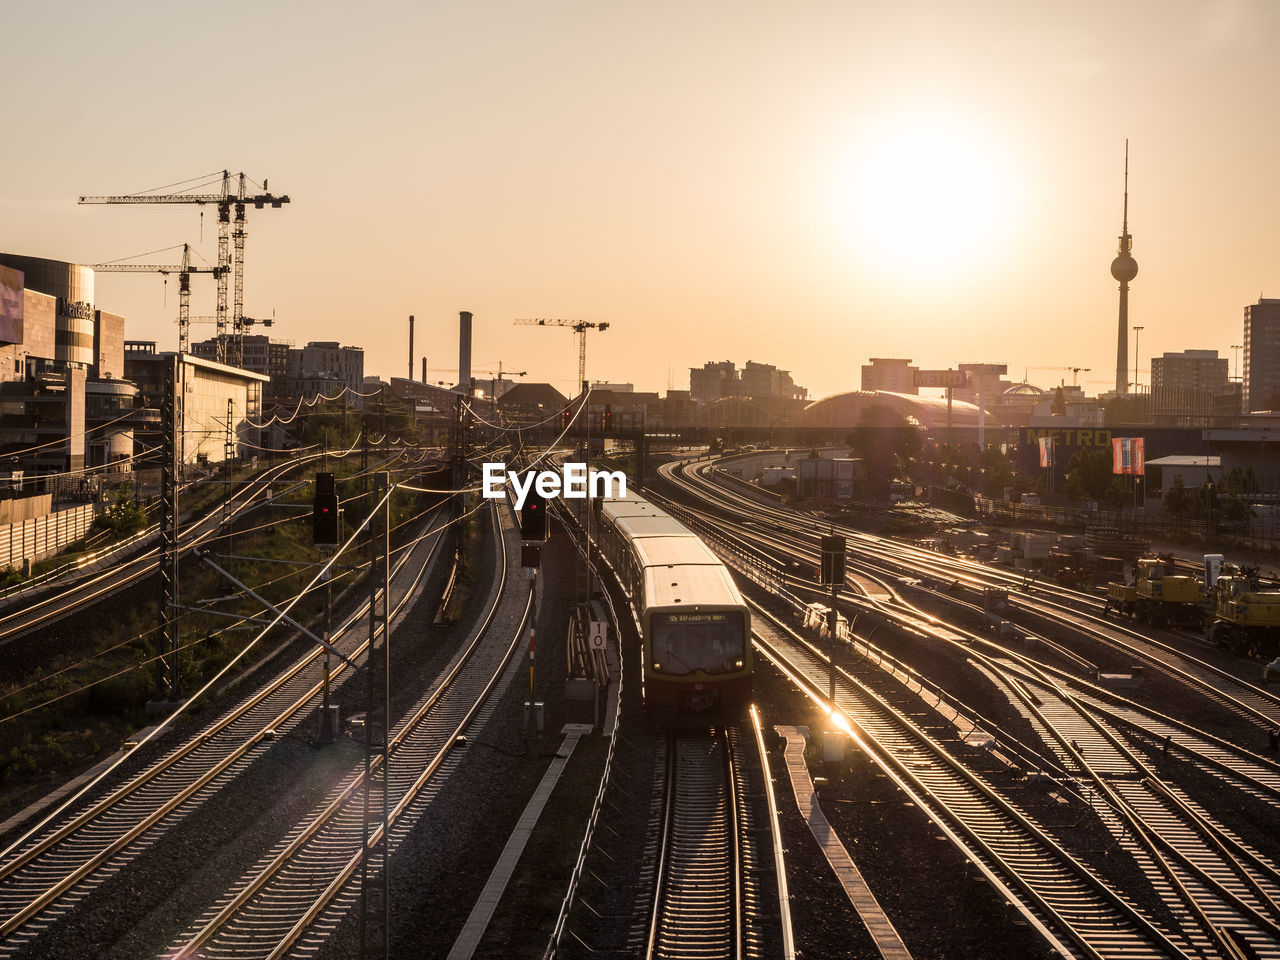 View of berlin and train tracks during golden hour